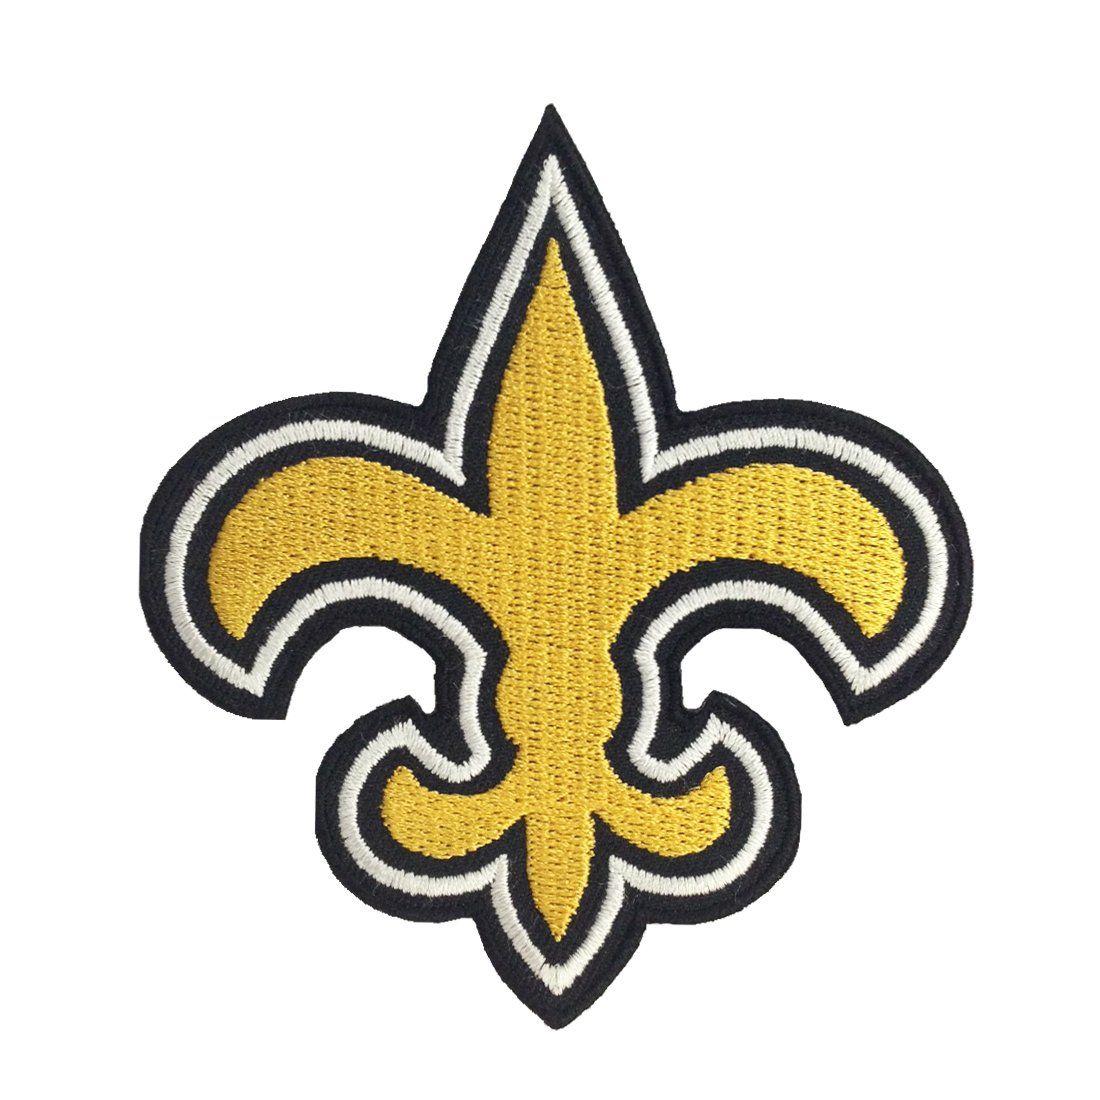 New Orleans Logo - Amazon.com: 1 X New Orleans Saints Logo I Embroidered Iron Patches ...